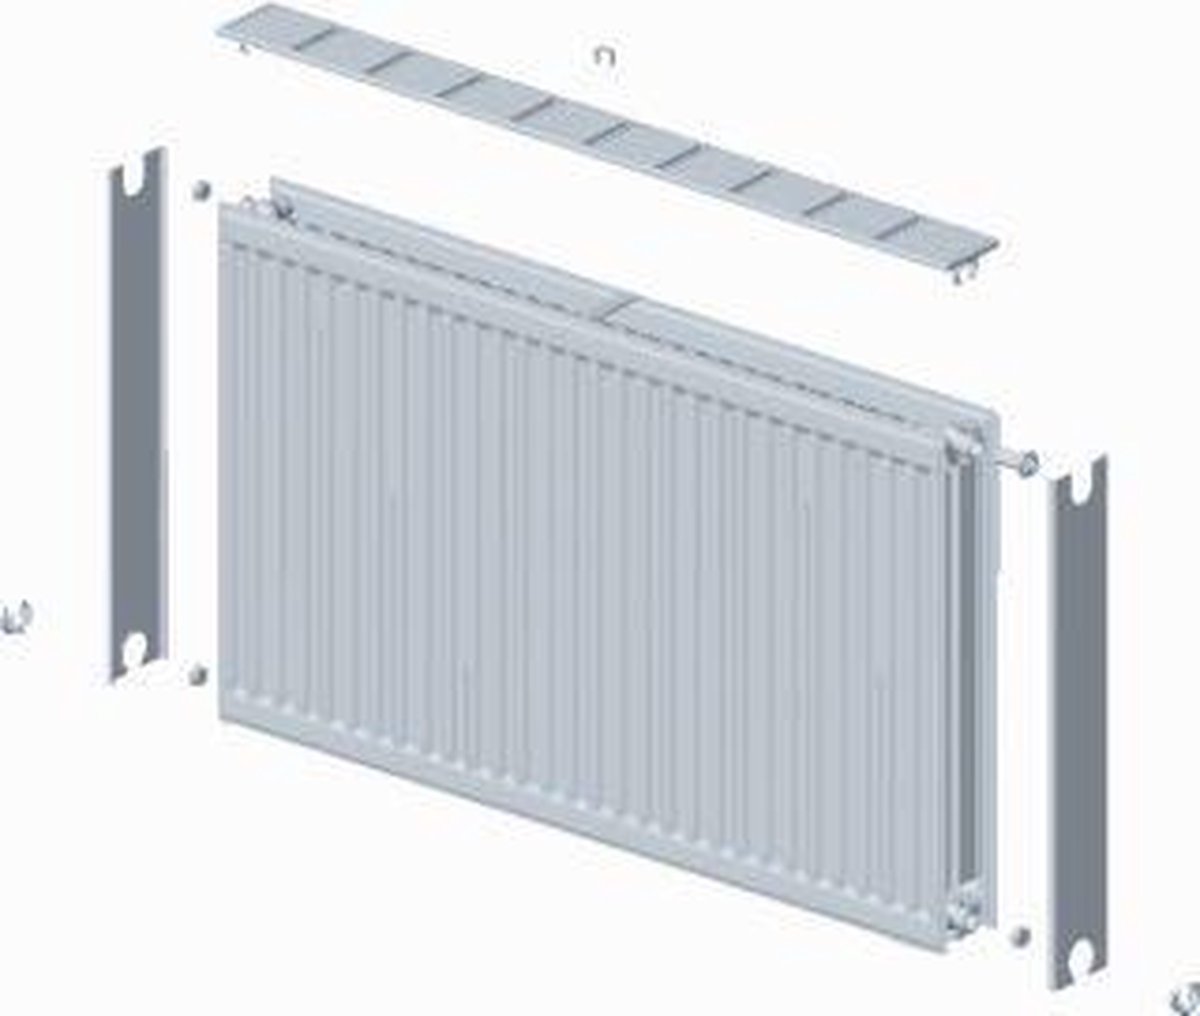 Stelrad paneelradiator Novello, staal, wit, (hxlxd) 600x1000x100mm, 22